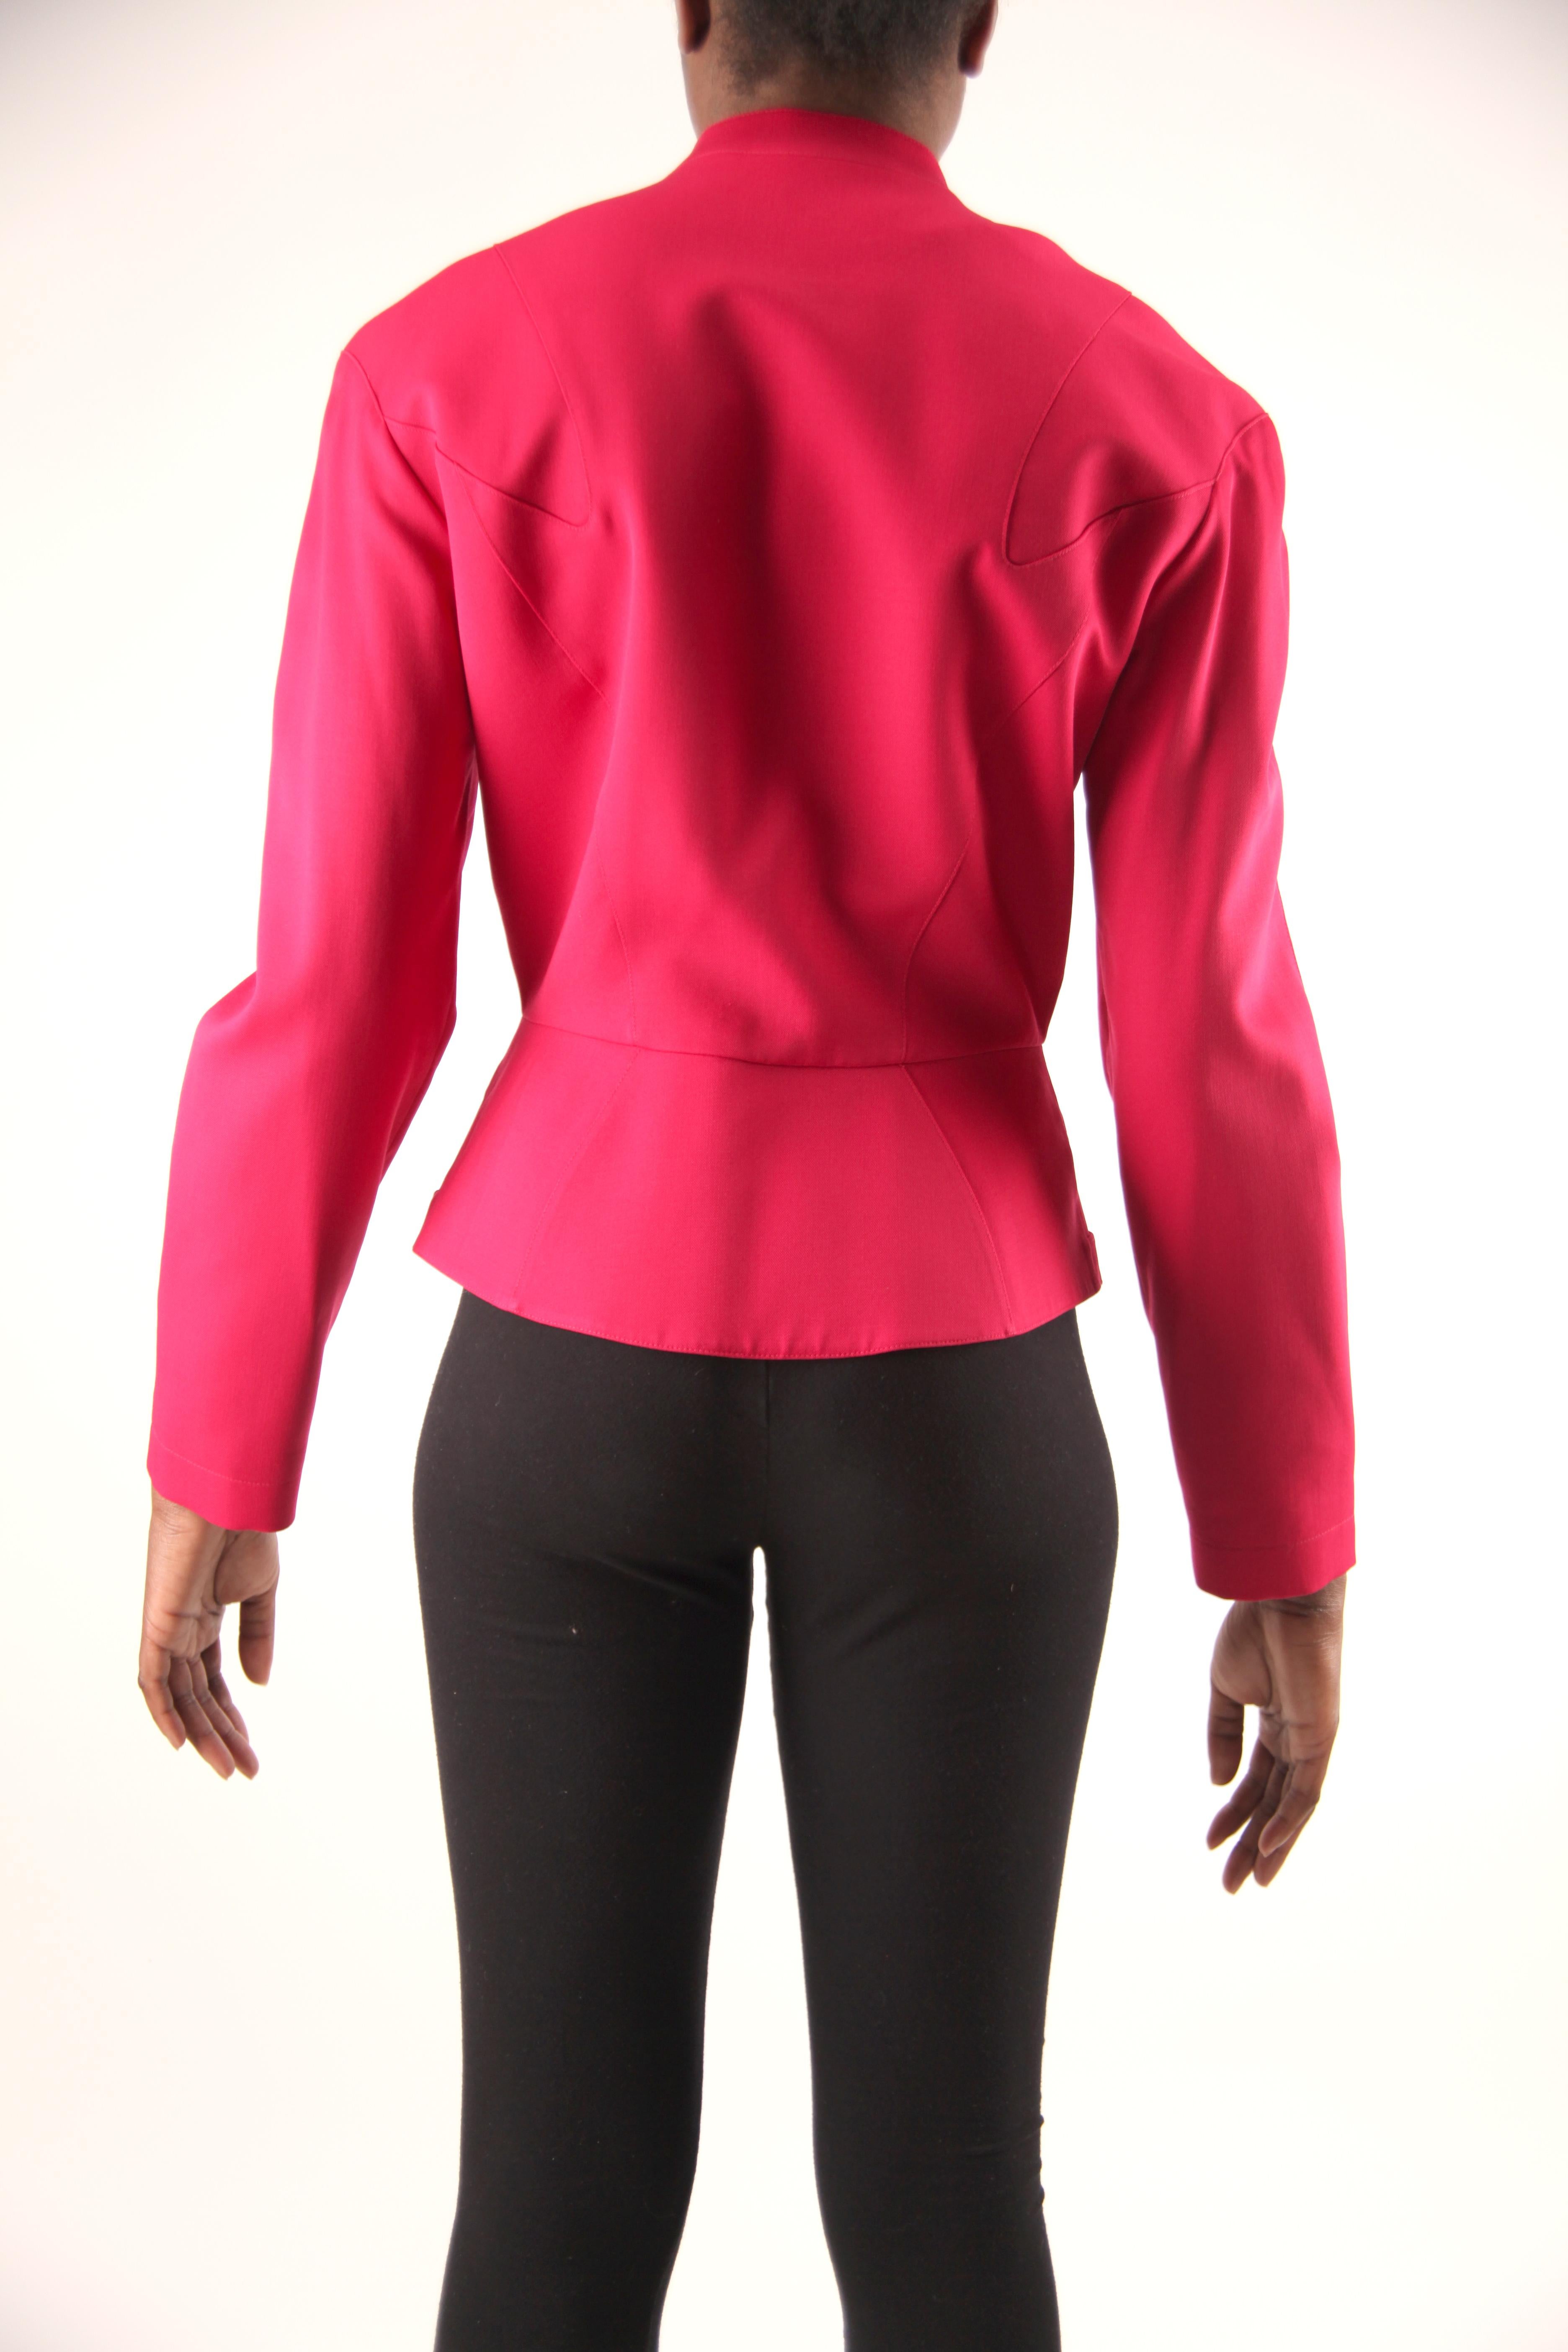 Red Thierry Mugler collectable intense “red-pink” hourglass jacket, circa 1980s For Sale